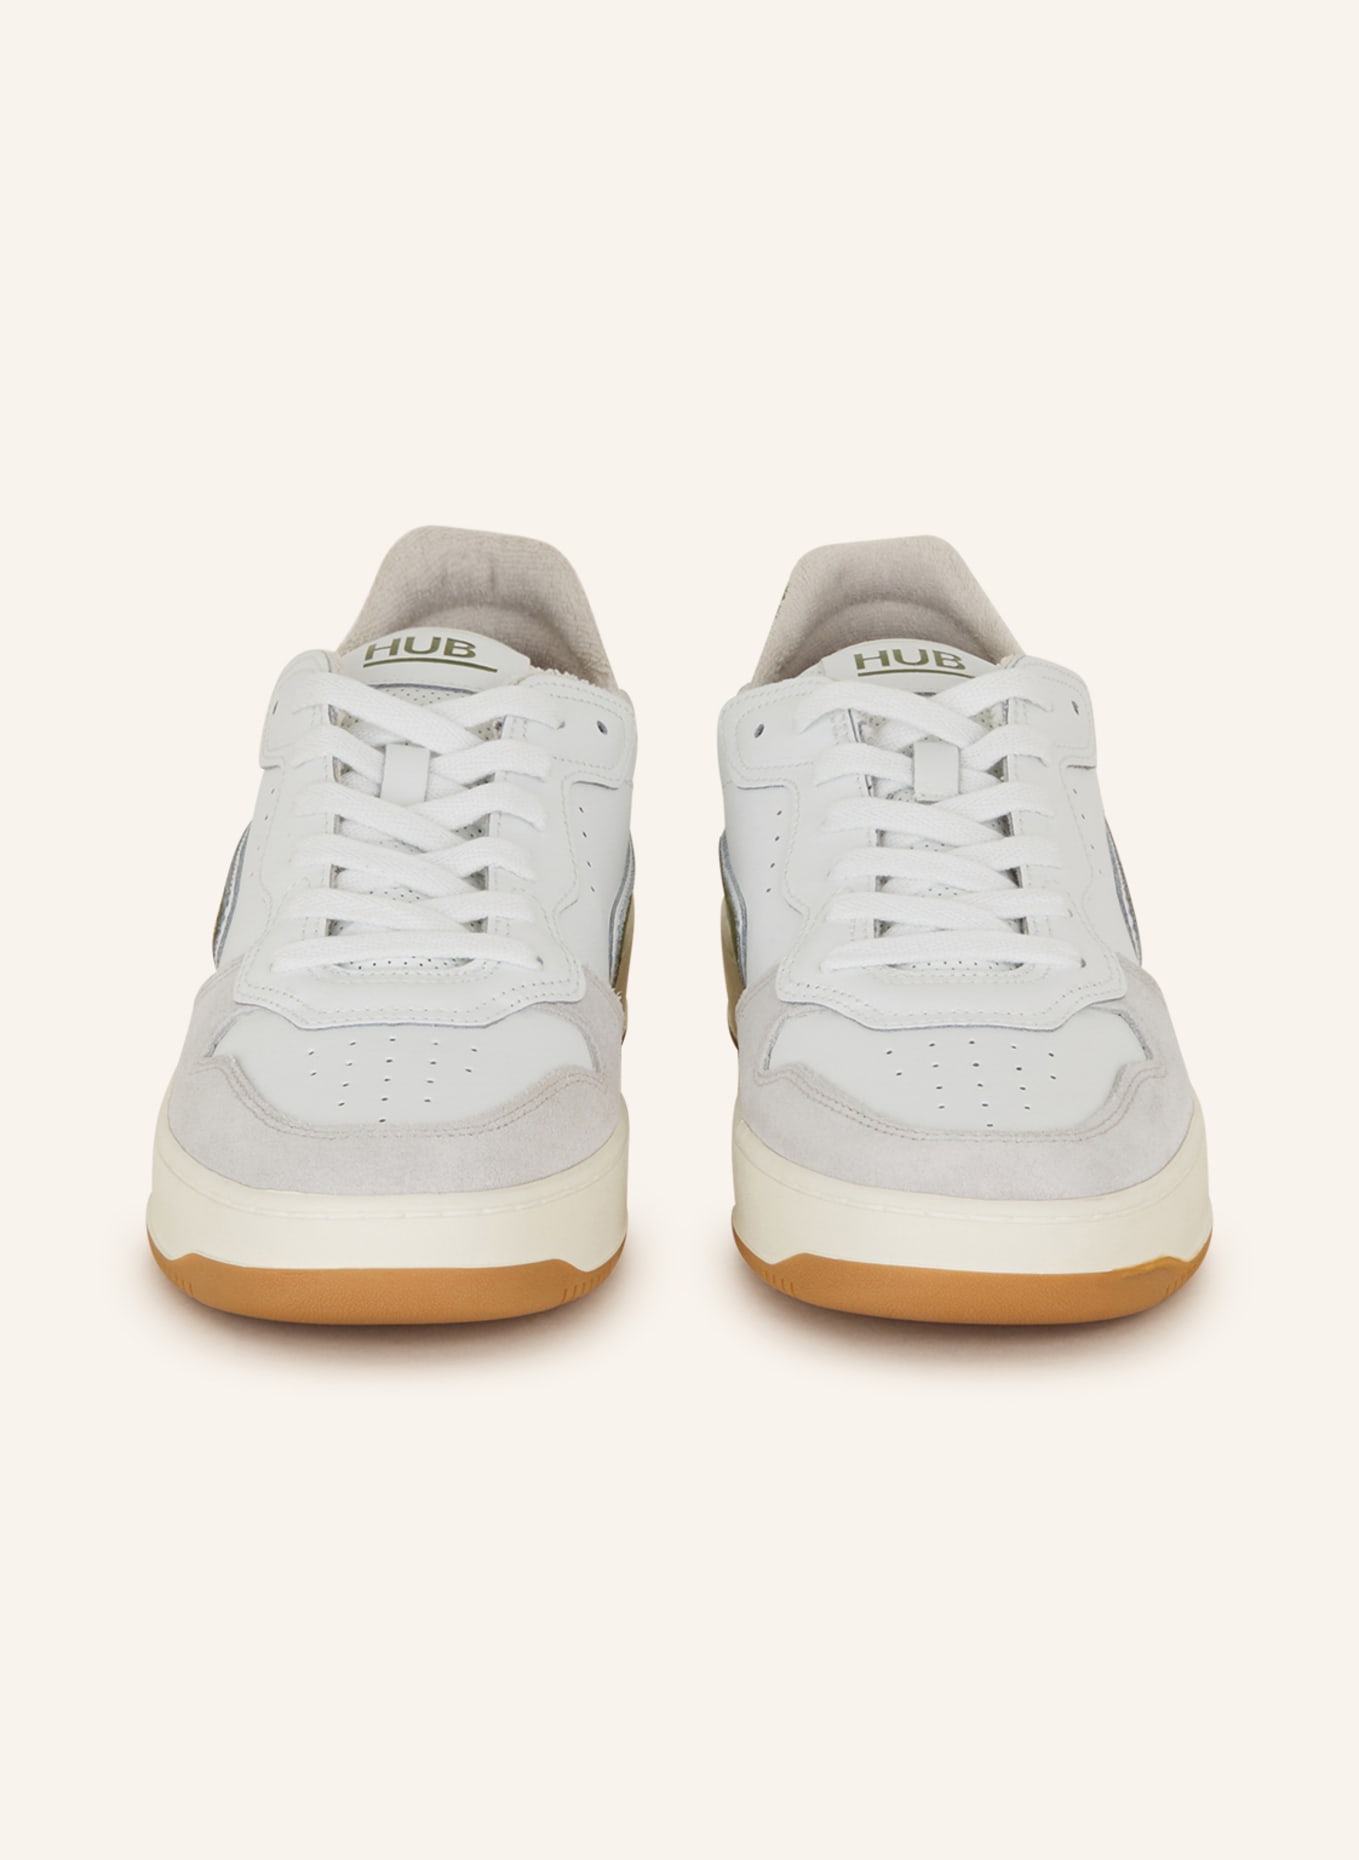 HUB Sneakers SMASH, Color: WHITE/ OLIVE (Image 3)